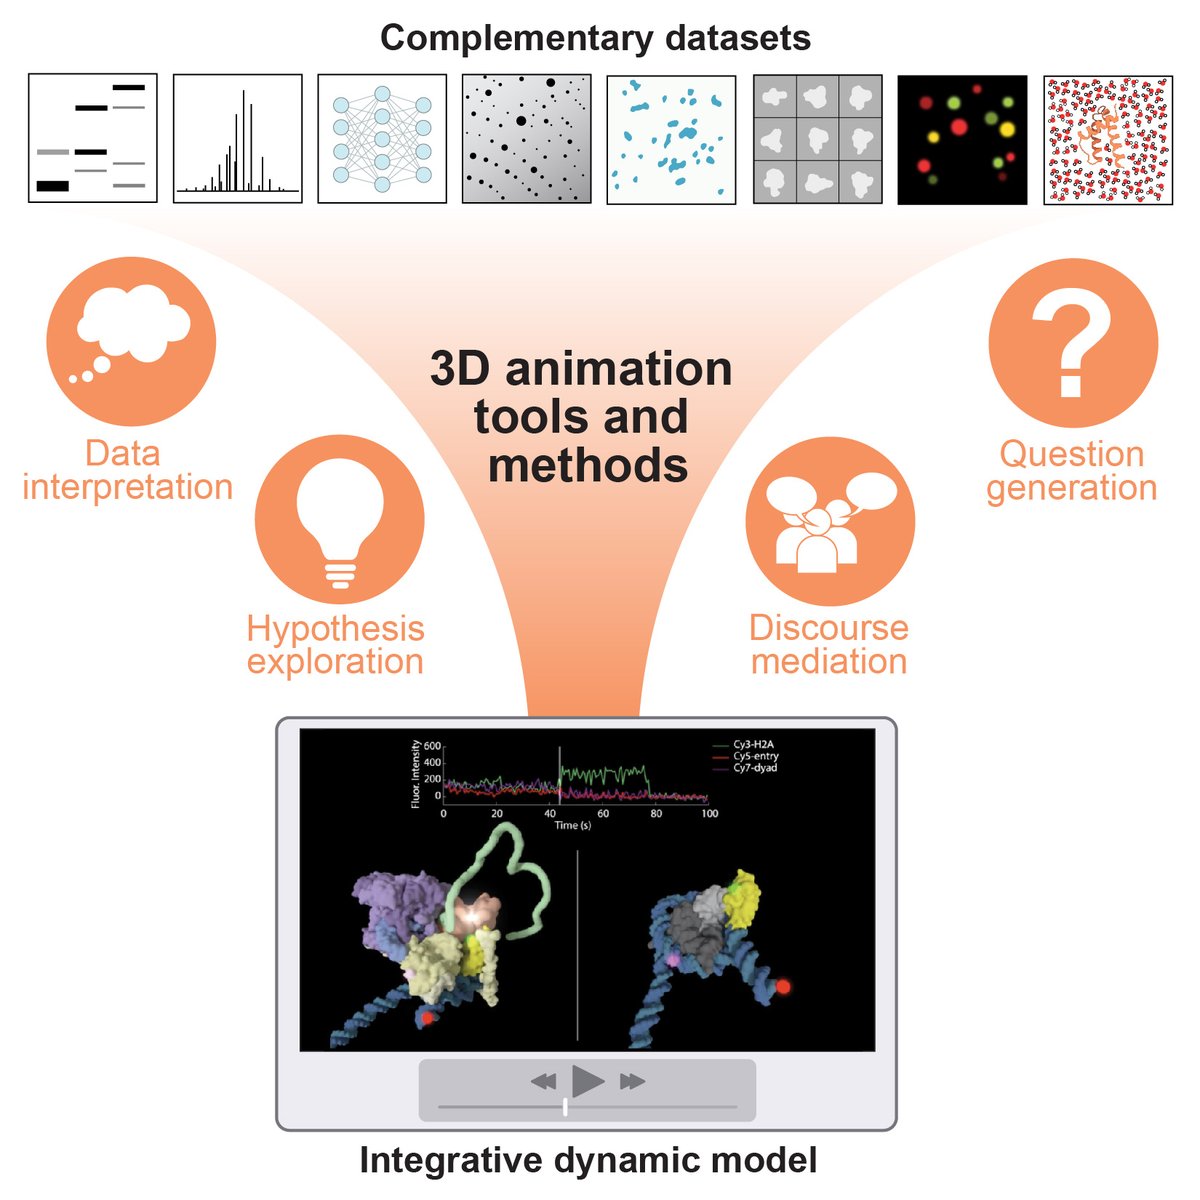 Check out the Animation Lab's latest paper by @MargotRiggi and @torrez_rach that describes how animation tools can be used to model dynamic molecular mechanisms! authors.elsevier.com/a/1iNW63SNvc6o…